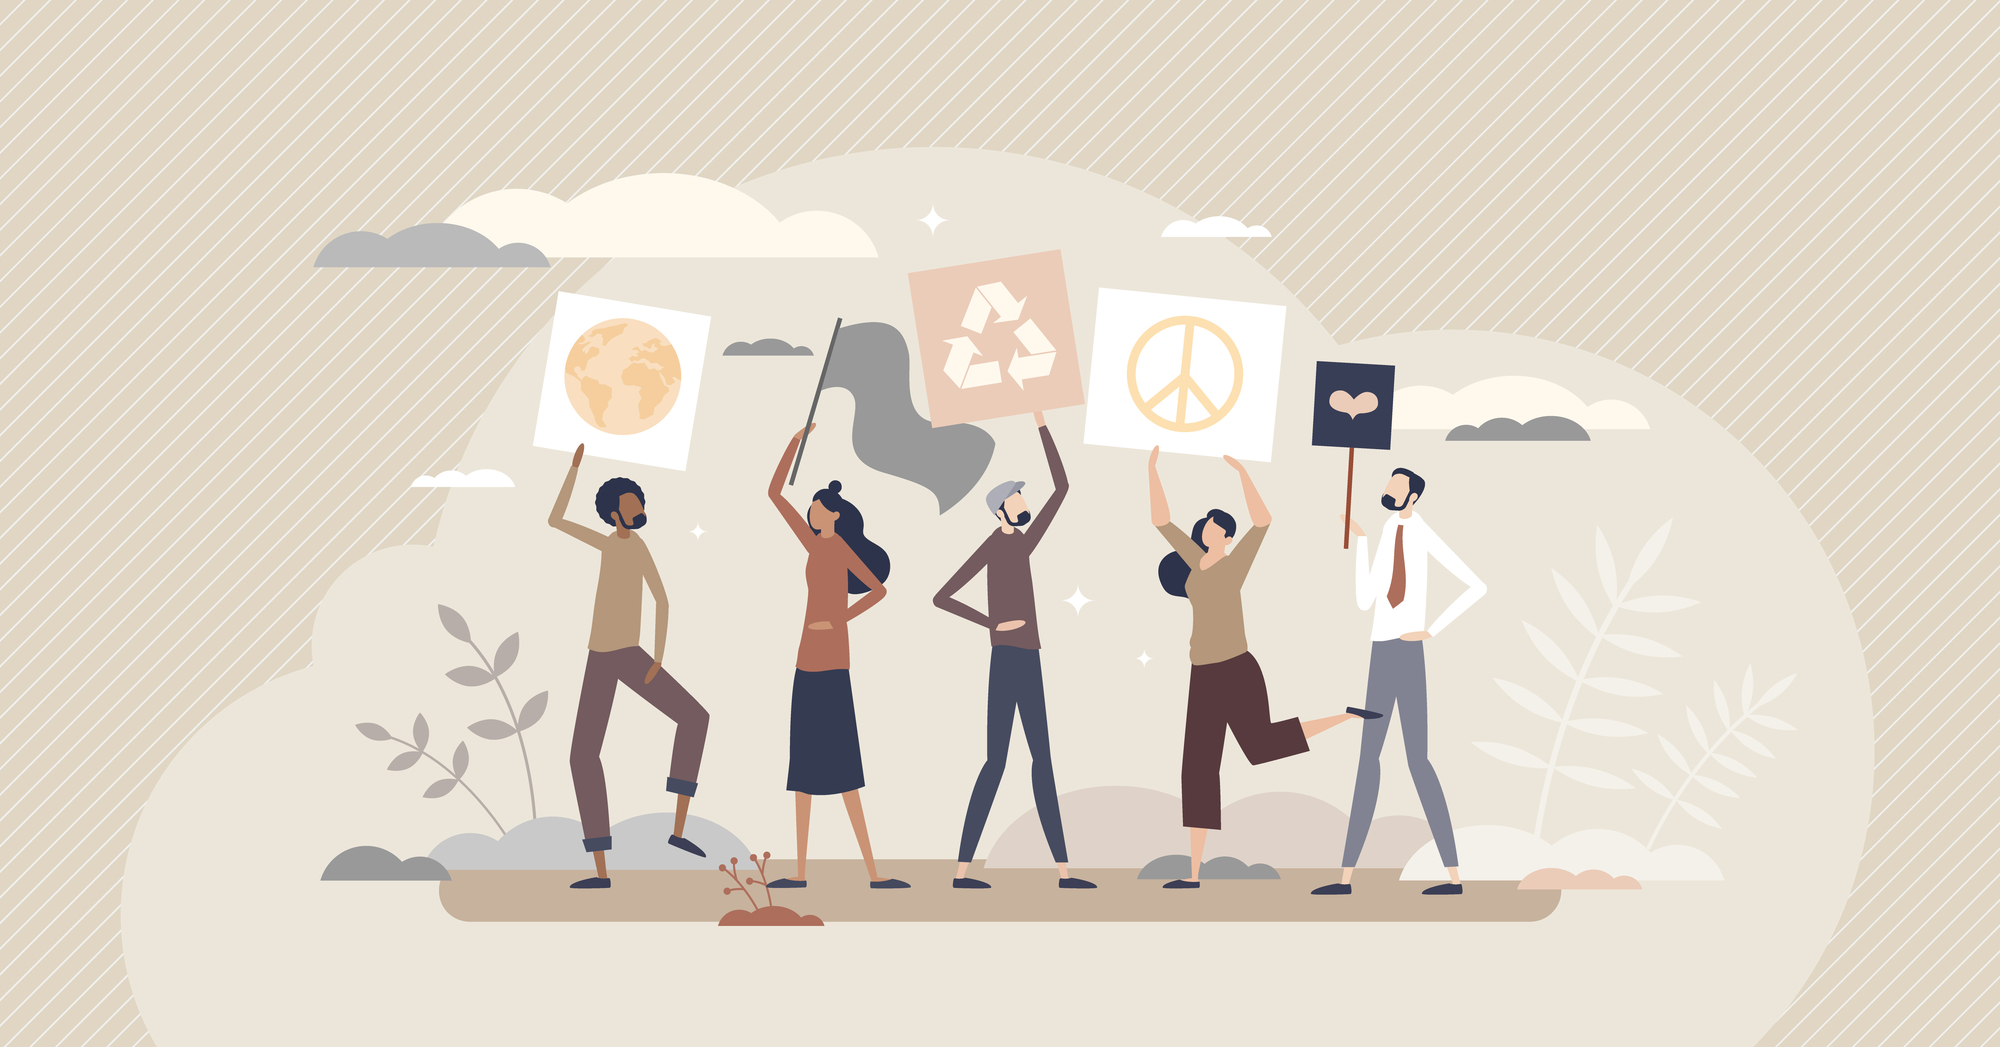 Activist protests and demonstration as equality support tiny person concept. Social group solidarity movement and strike as human democracy and unity symbol vector illustration. Peaceful rally scene.